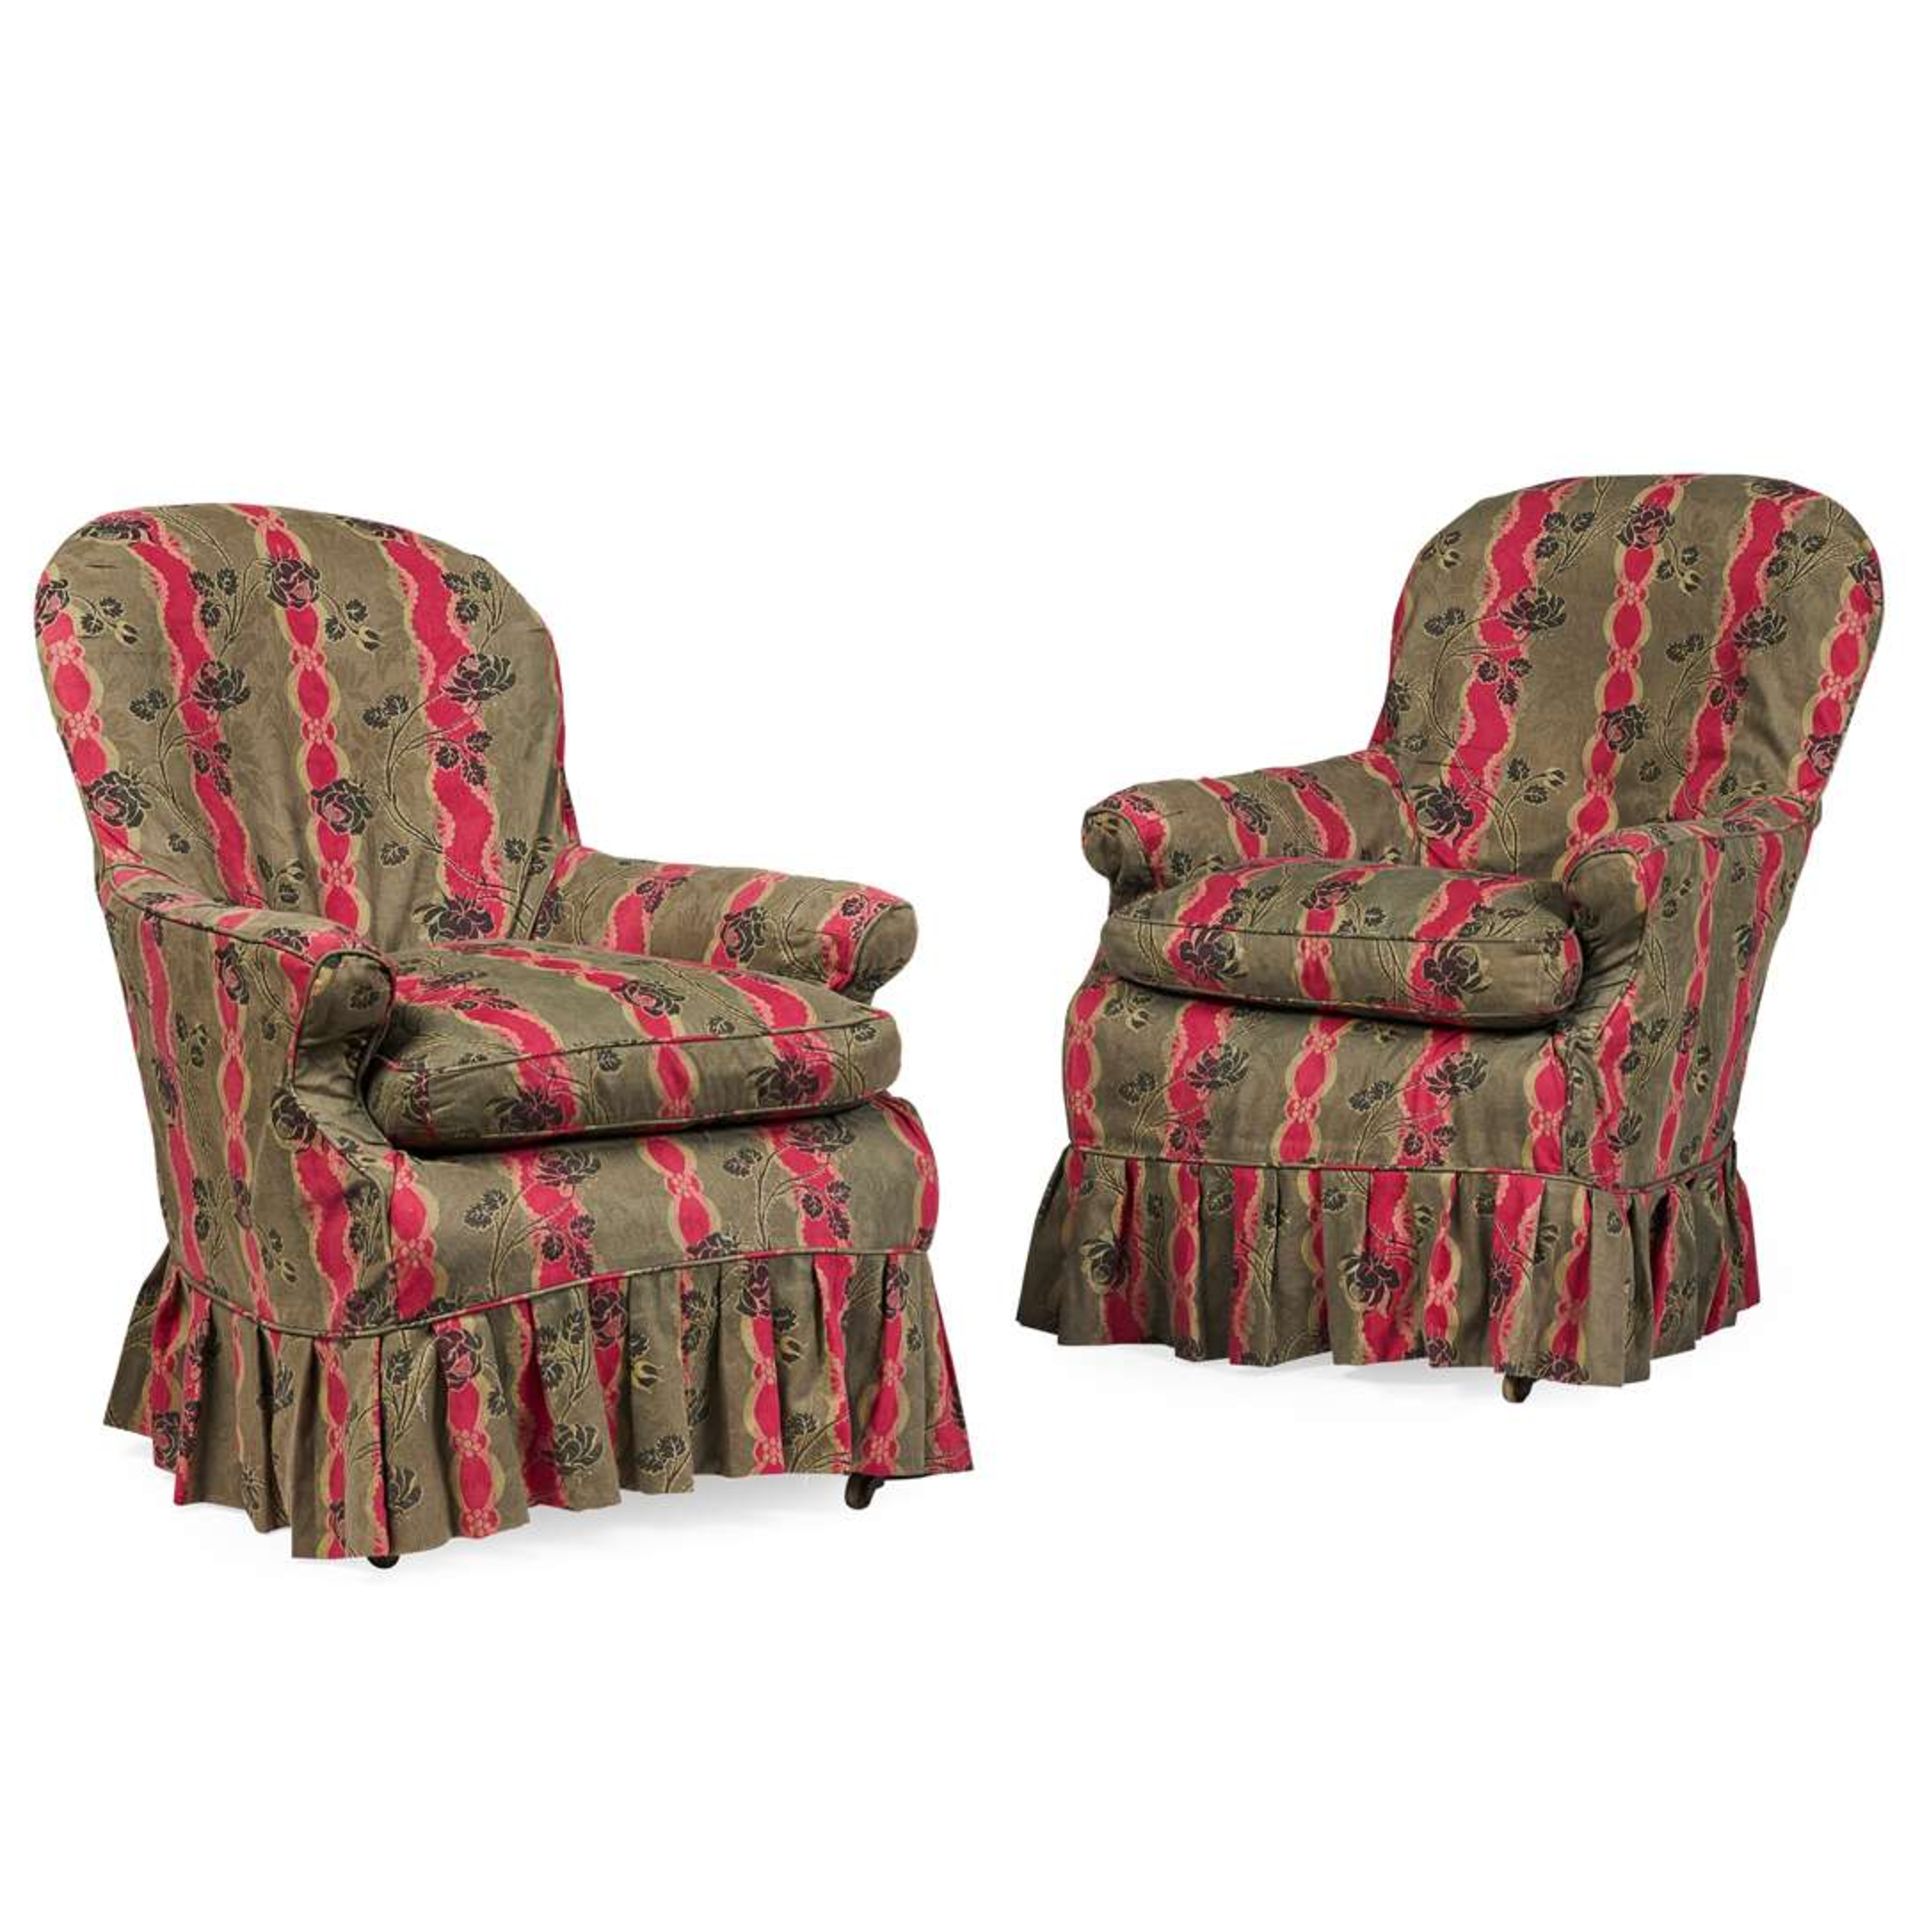 PAIR OF VICTORIAN UPHOLSTERED ARMCHAIRS - Image 2 of 2